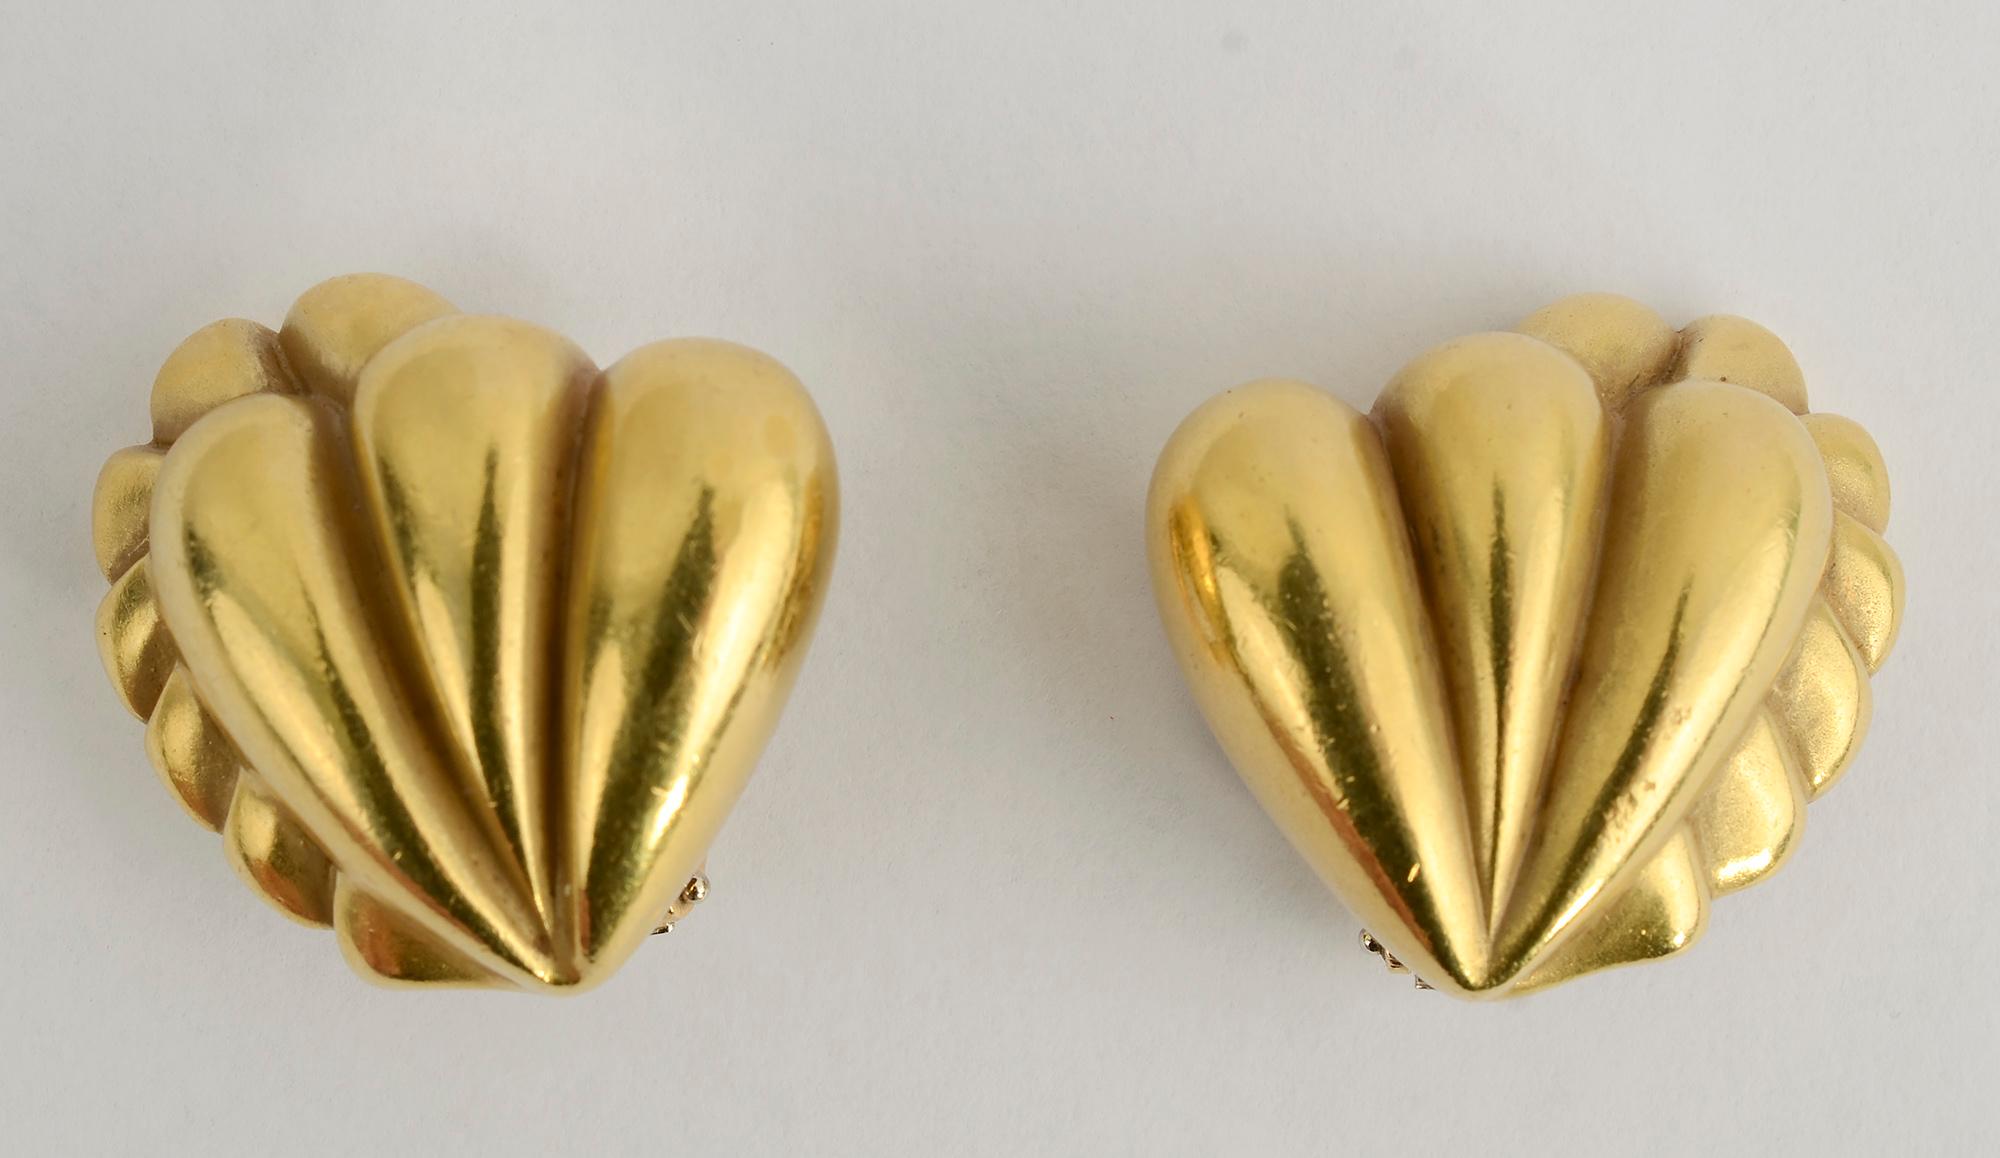 Large 18 karat gold earrings by Barry Kieselstein Cord that are abstracted, lobed hearts.
Backs are clips that can be converted to posts.